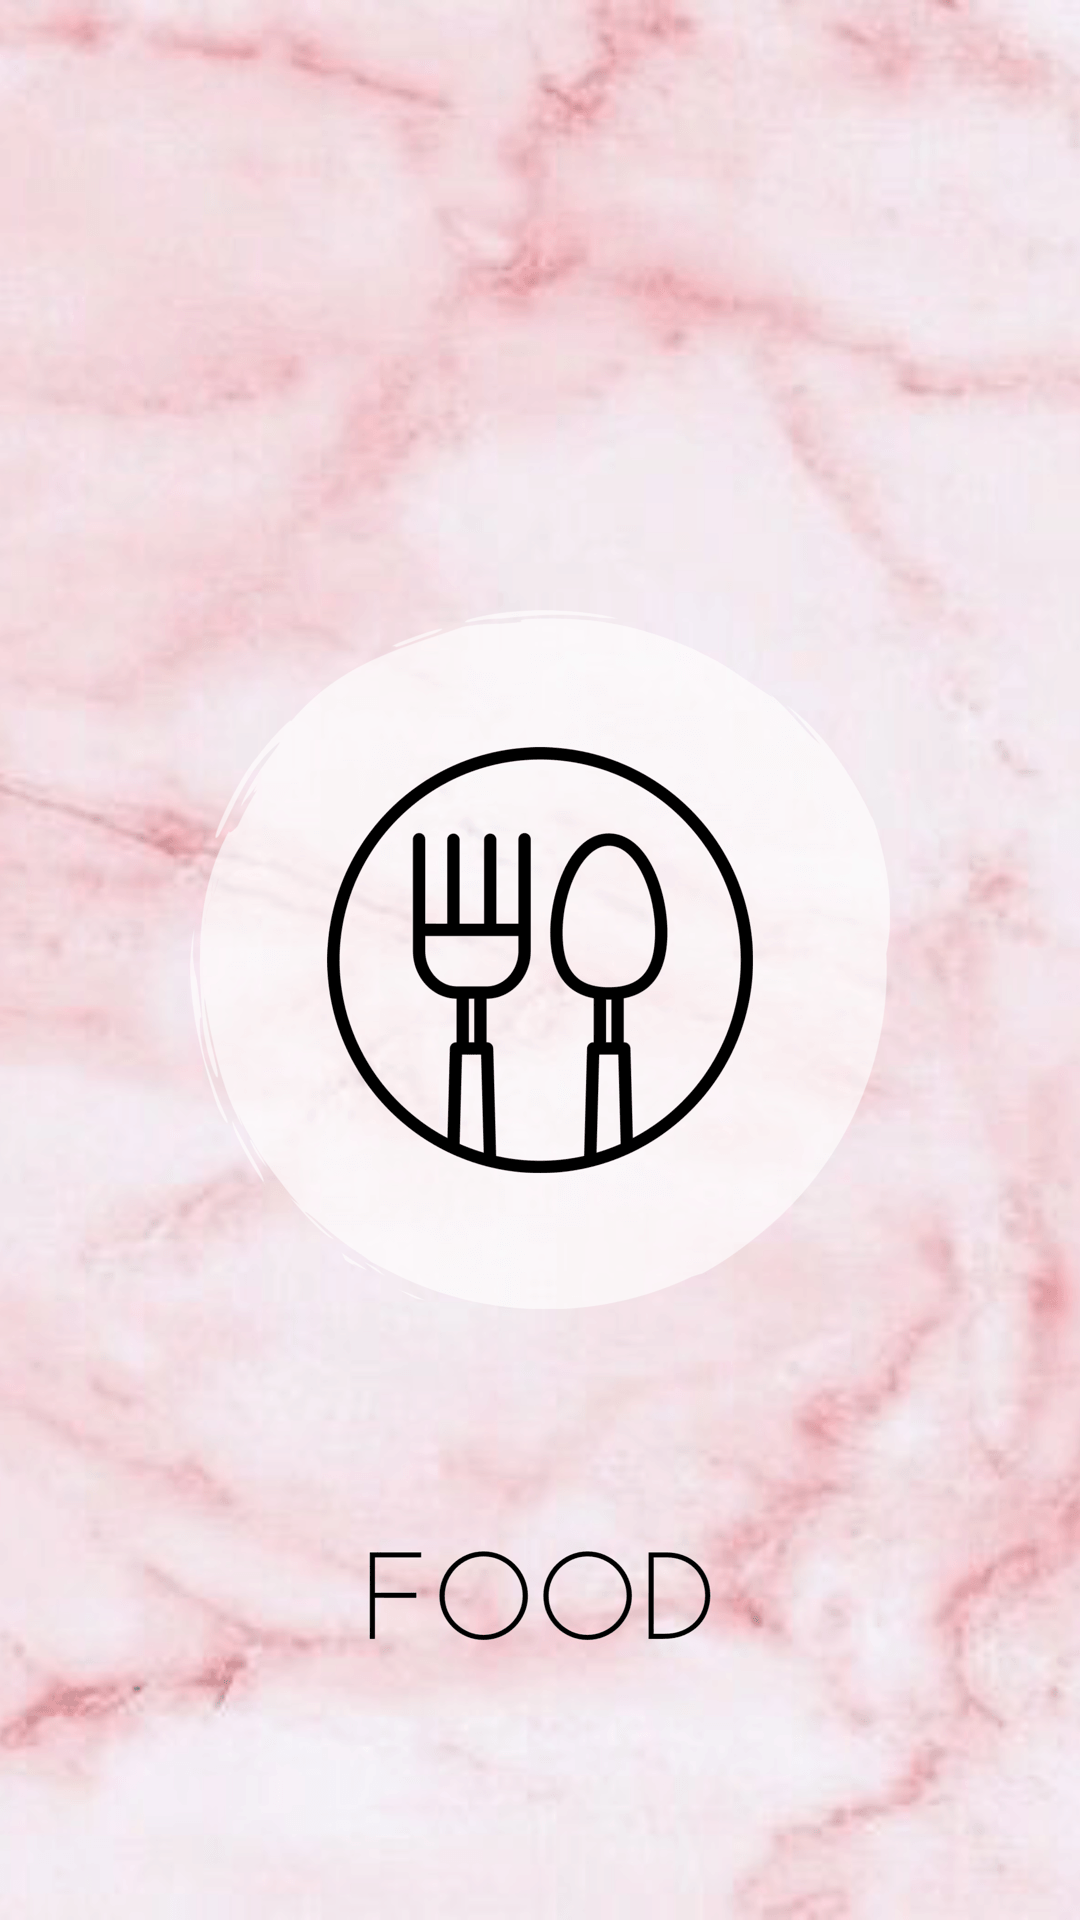 Instagram Instagram Logo - Highlight cover Pink and Floral Theme. Free Instagram